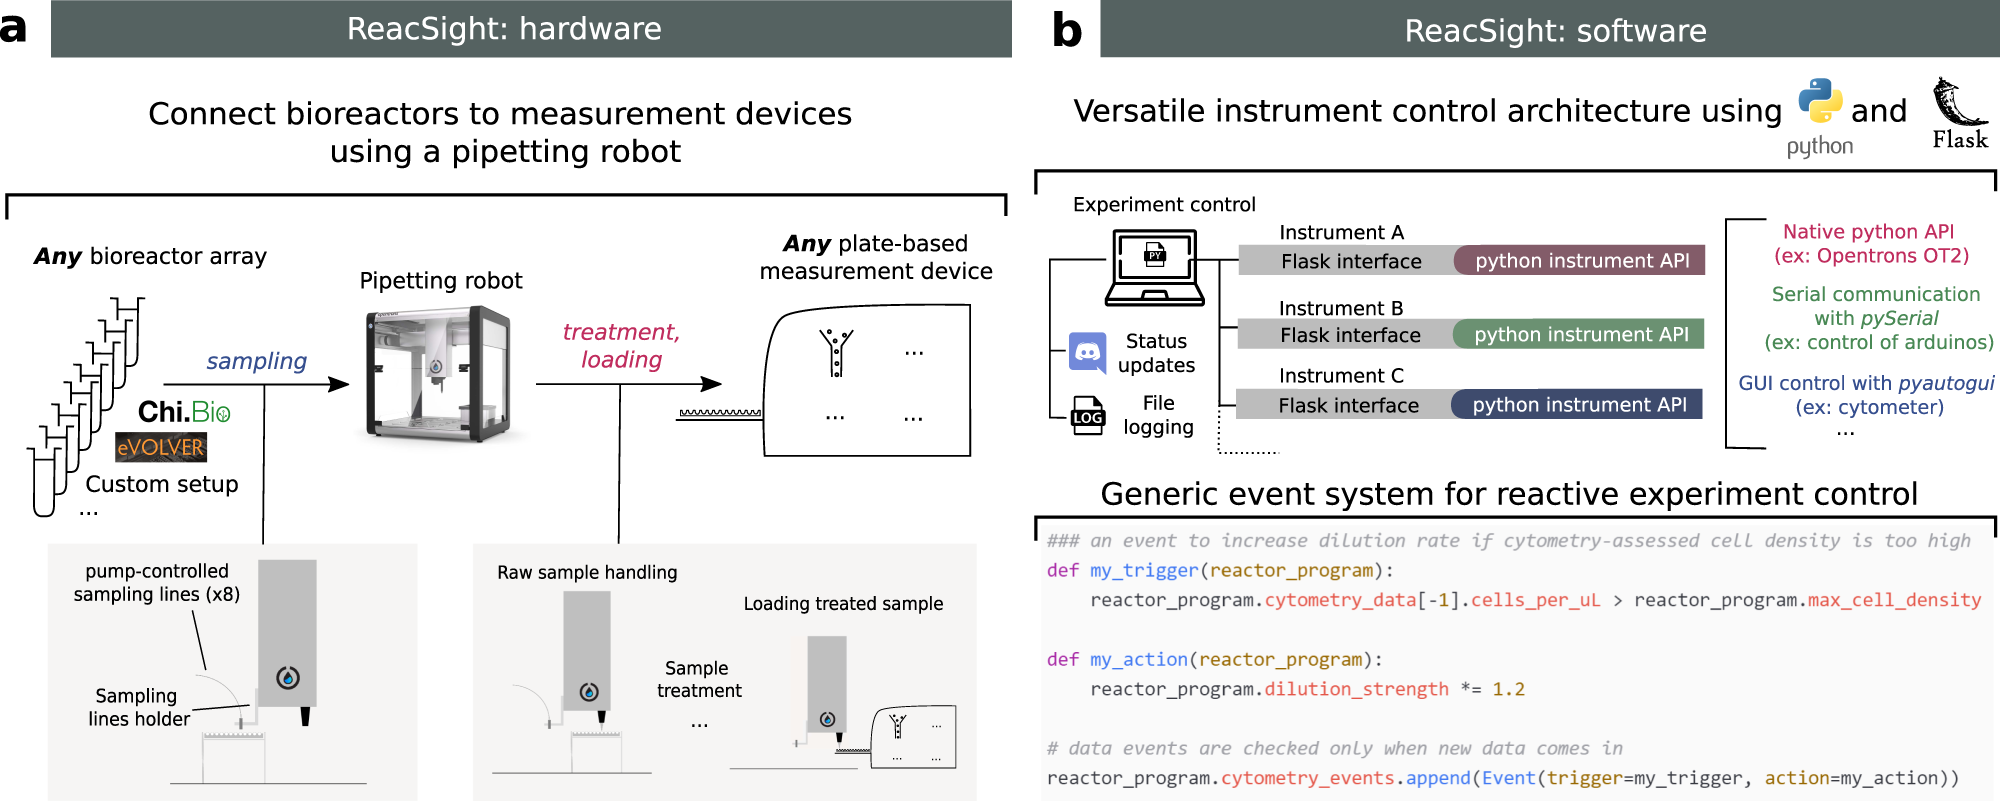 Enhancing bioreactor arrays for automated measurements and reactive control  with ReacSight | Nature Communications